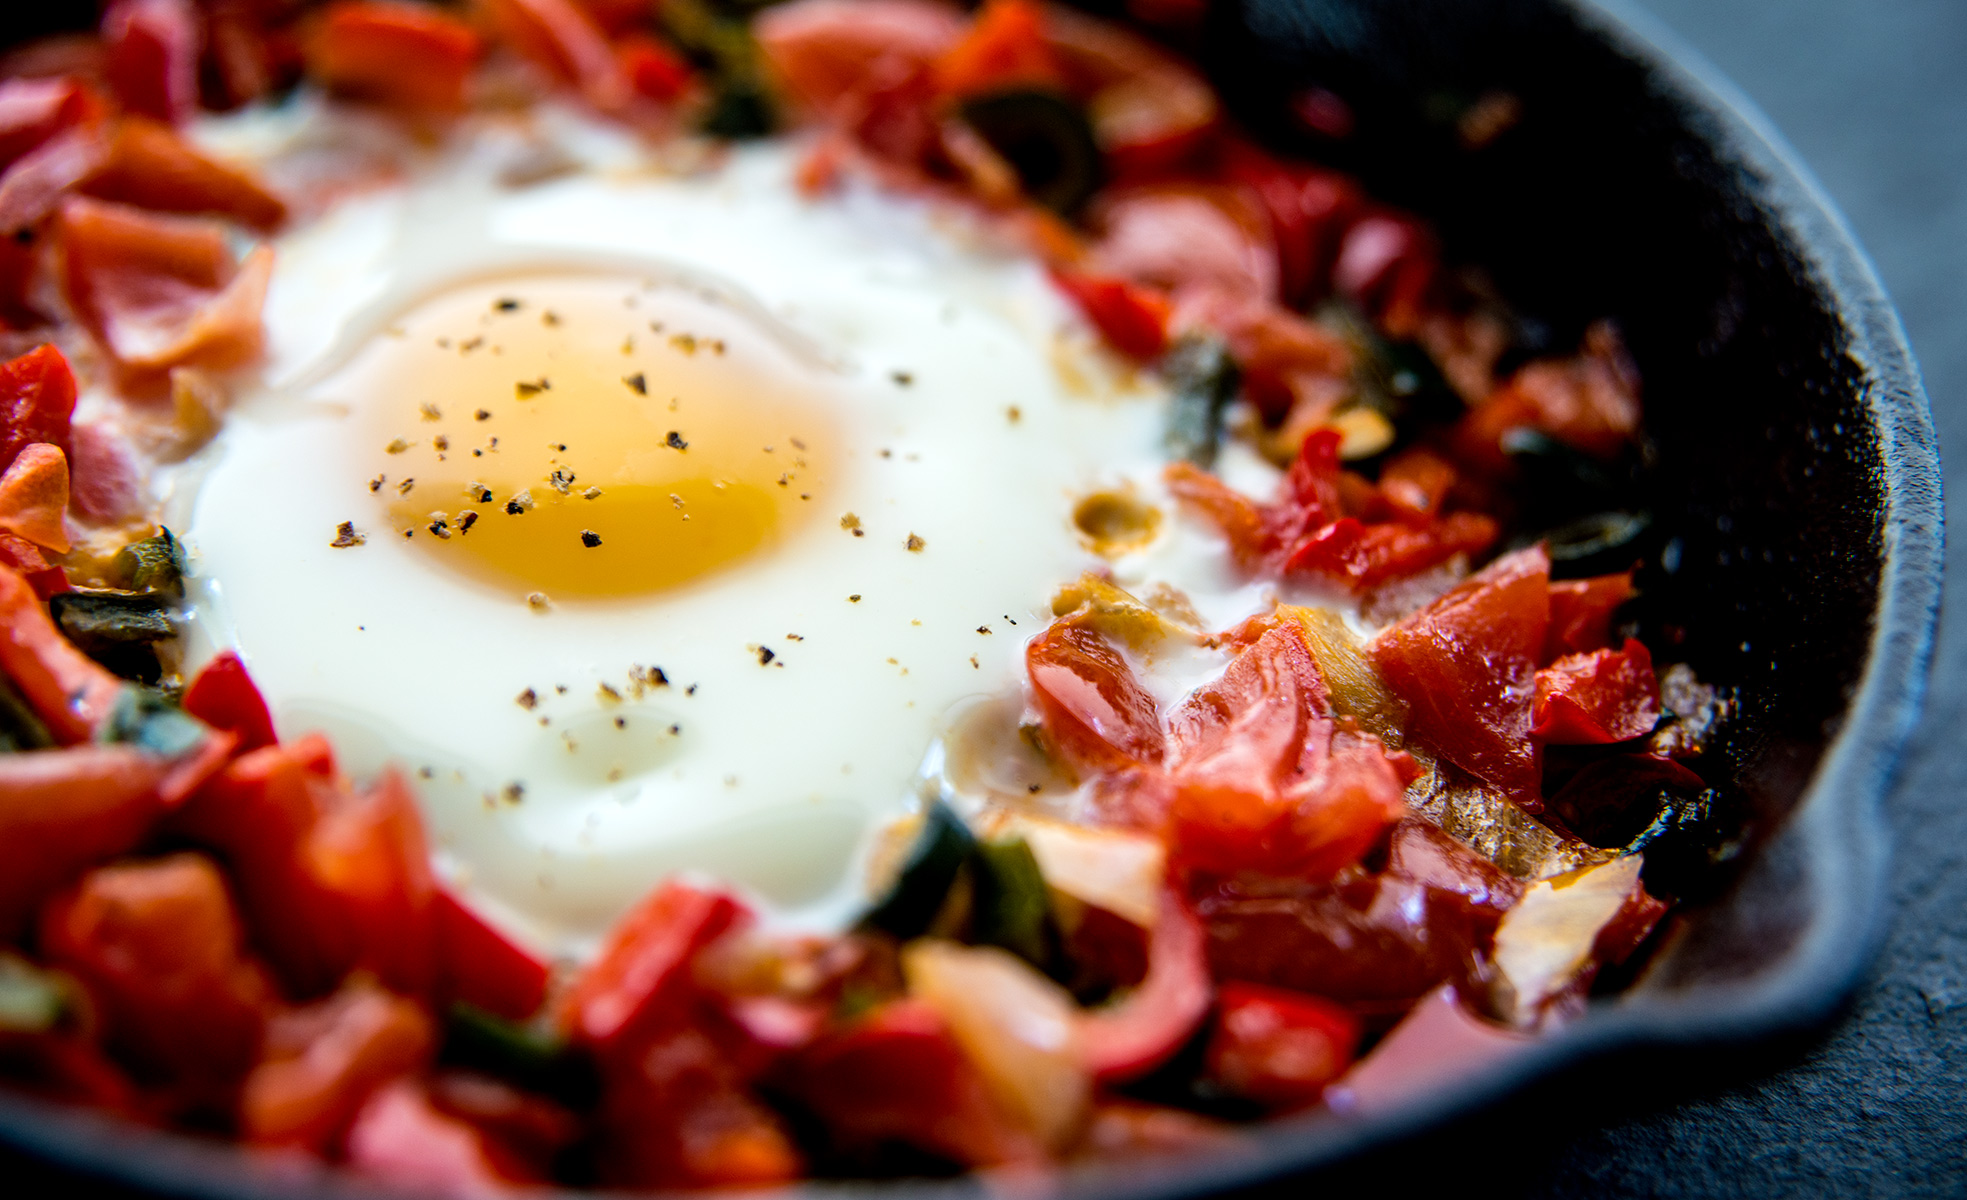 Egg-With-Peppers-Carl-Kravats-Photography